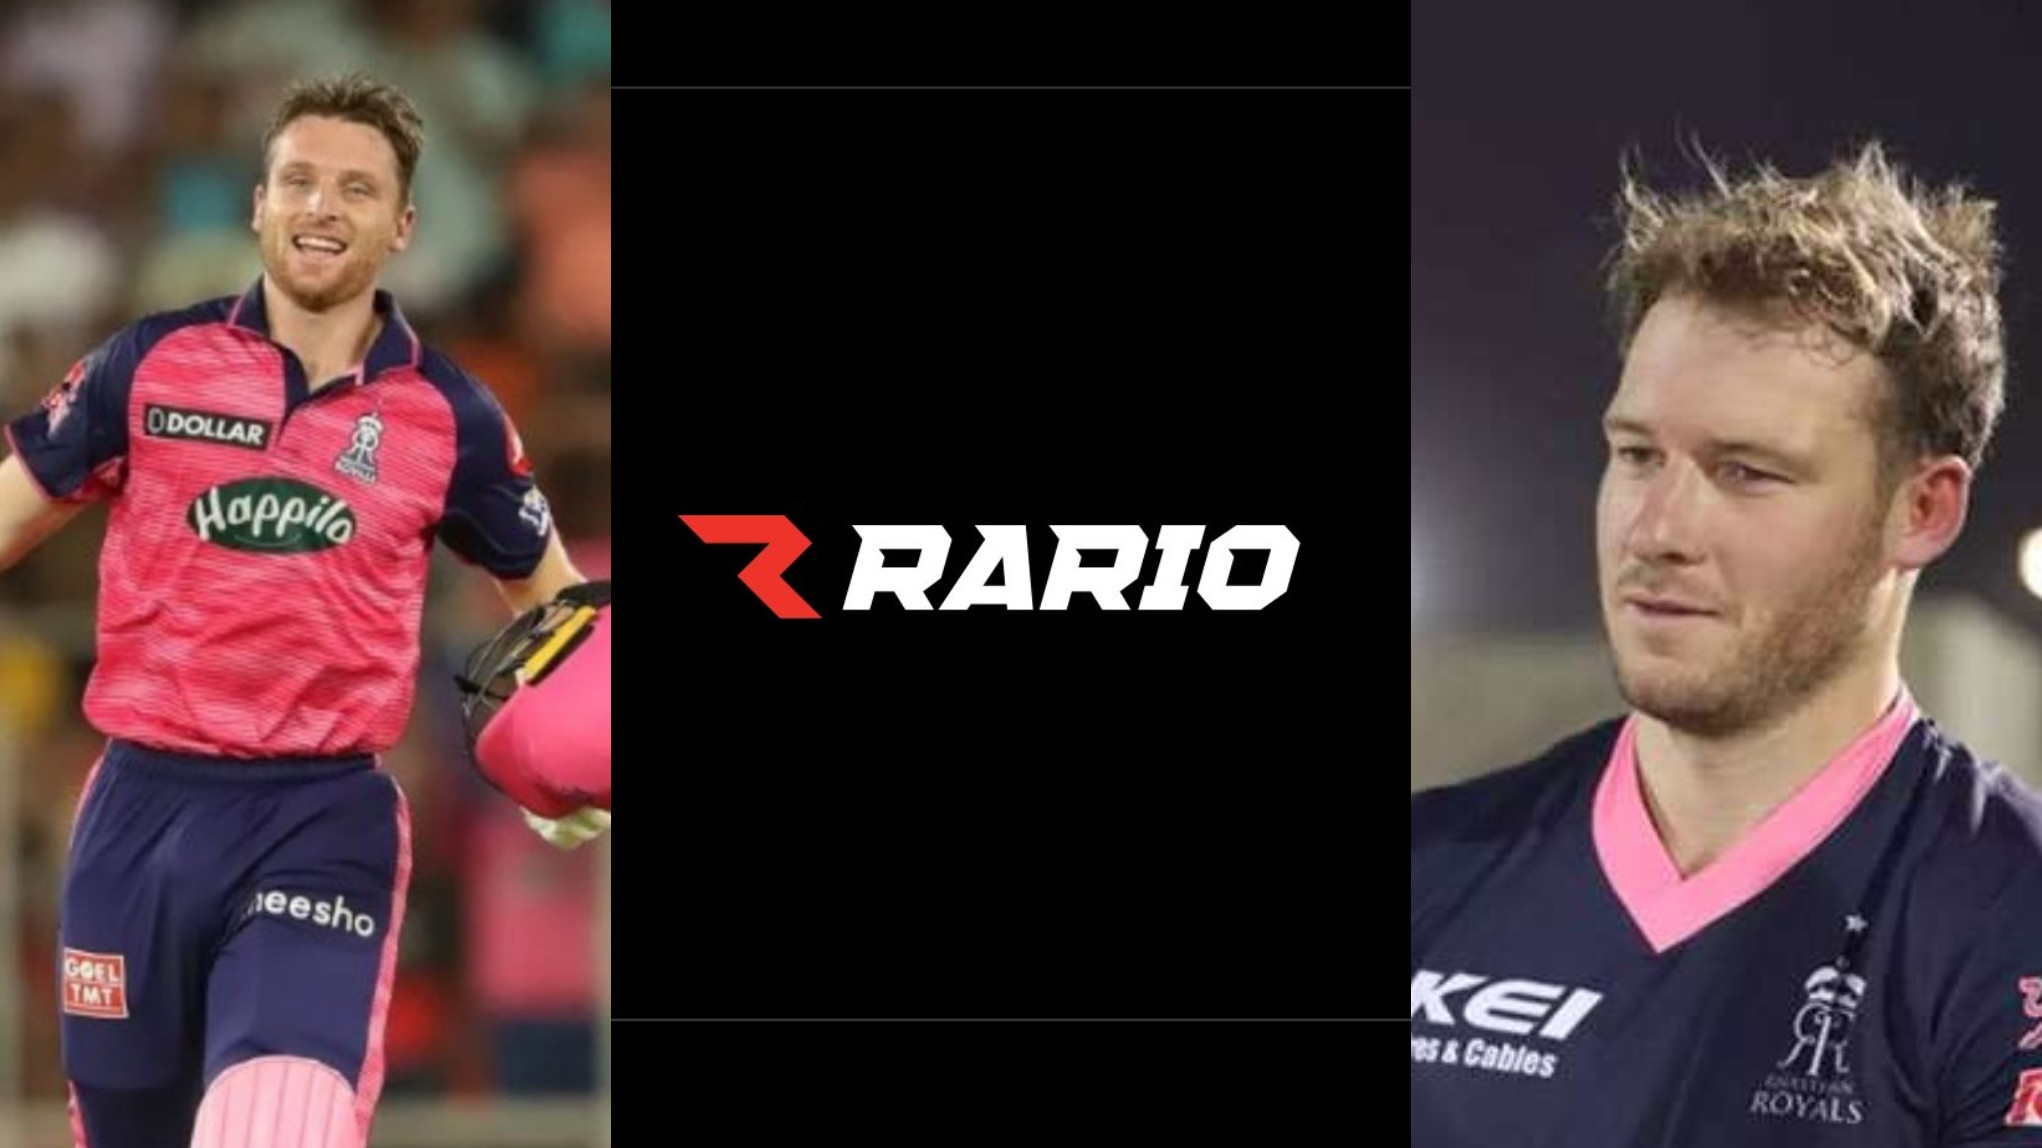 Rario D3 Predictions: Exciting player cards for the RSA T20 League and play for great prizes